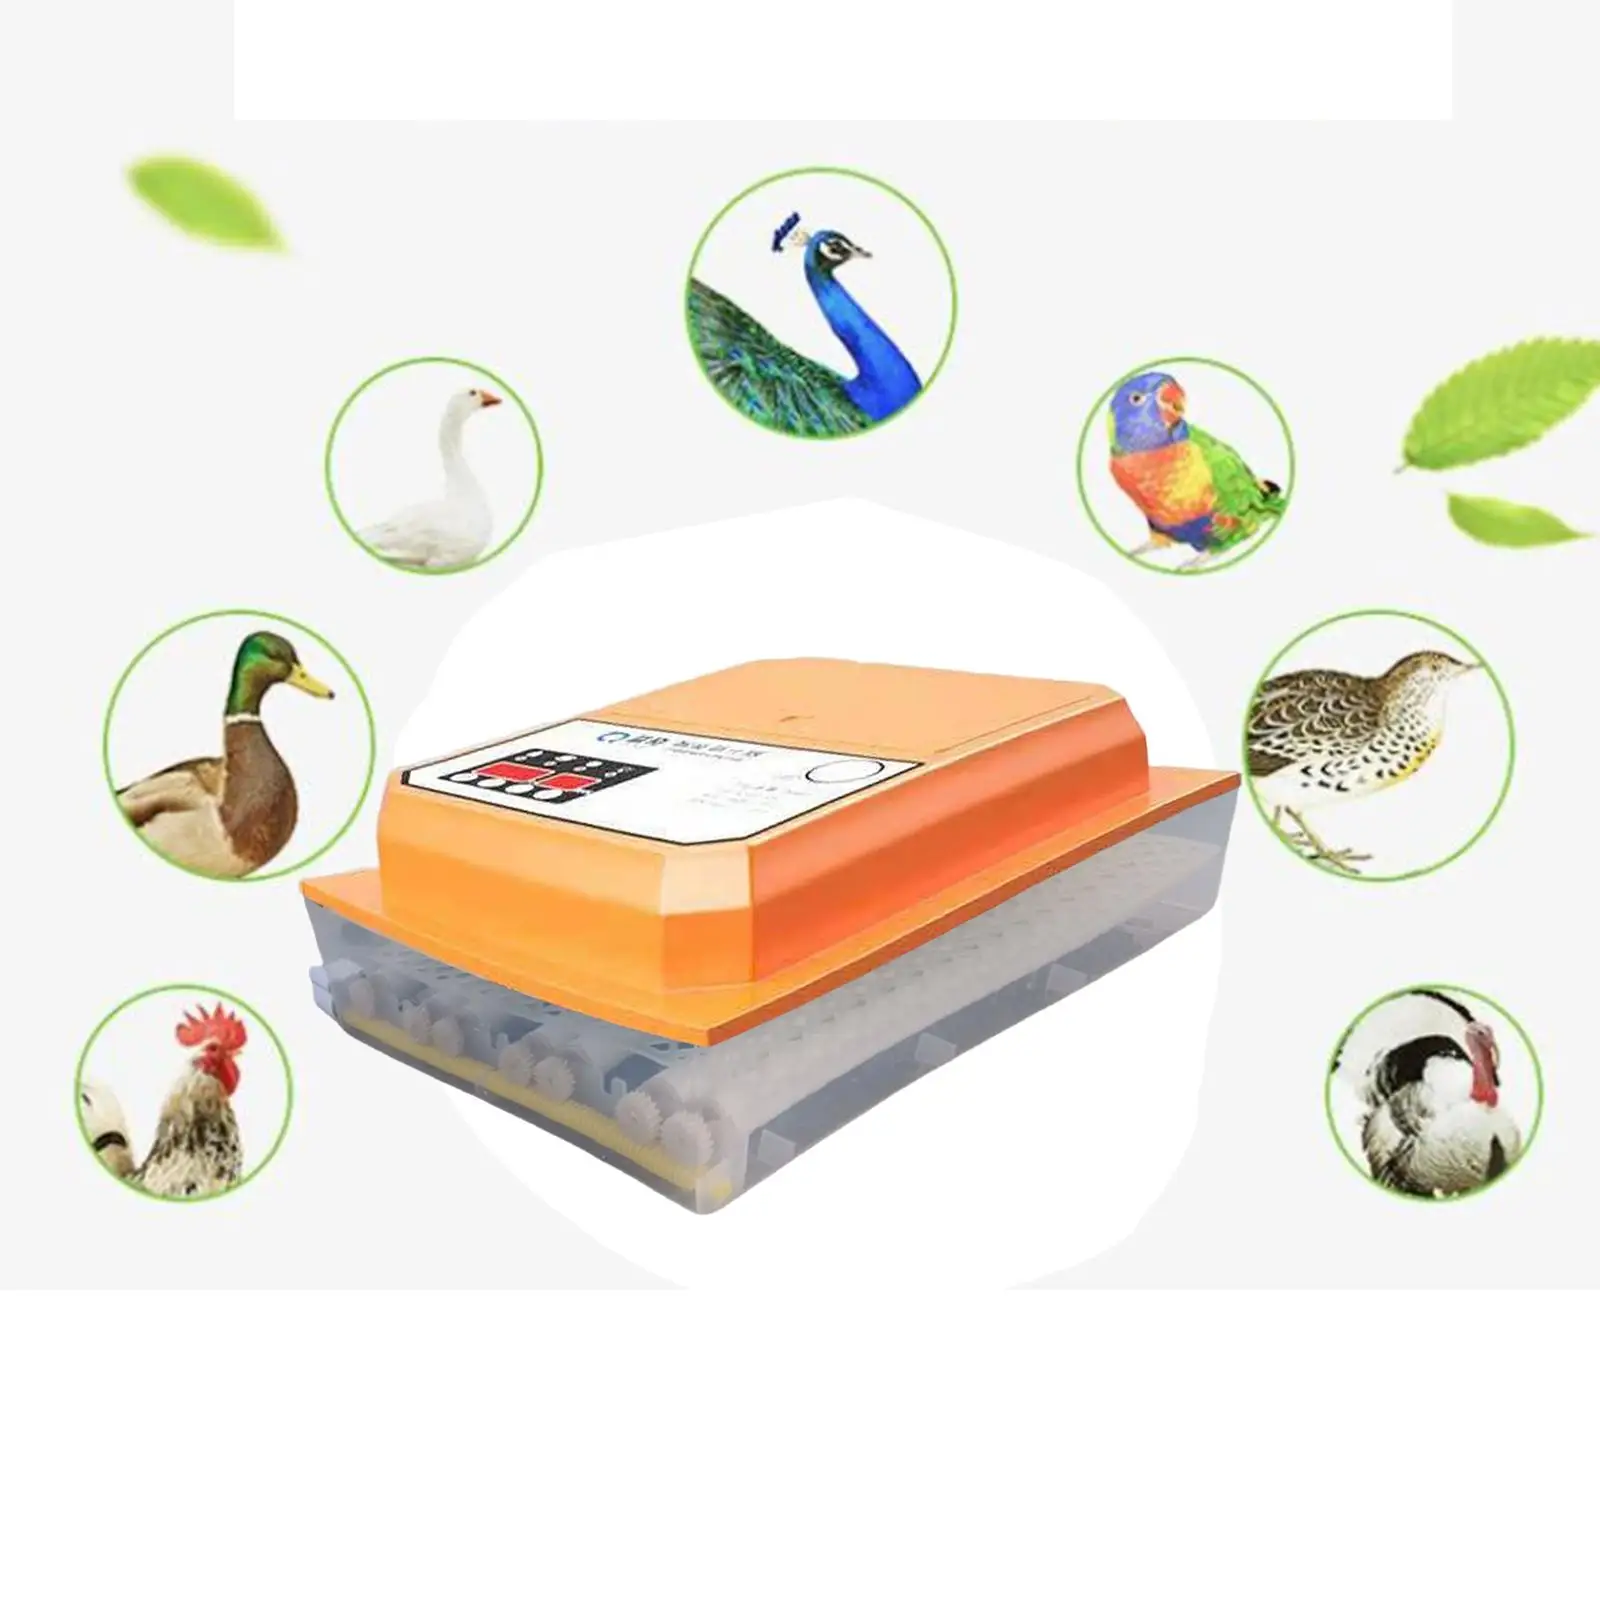 Fully Automatic Eggs Incubator Poultry Egg Turning Hatching Machine Brooder Device for Chicken Geese Quail